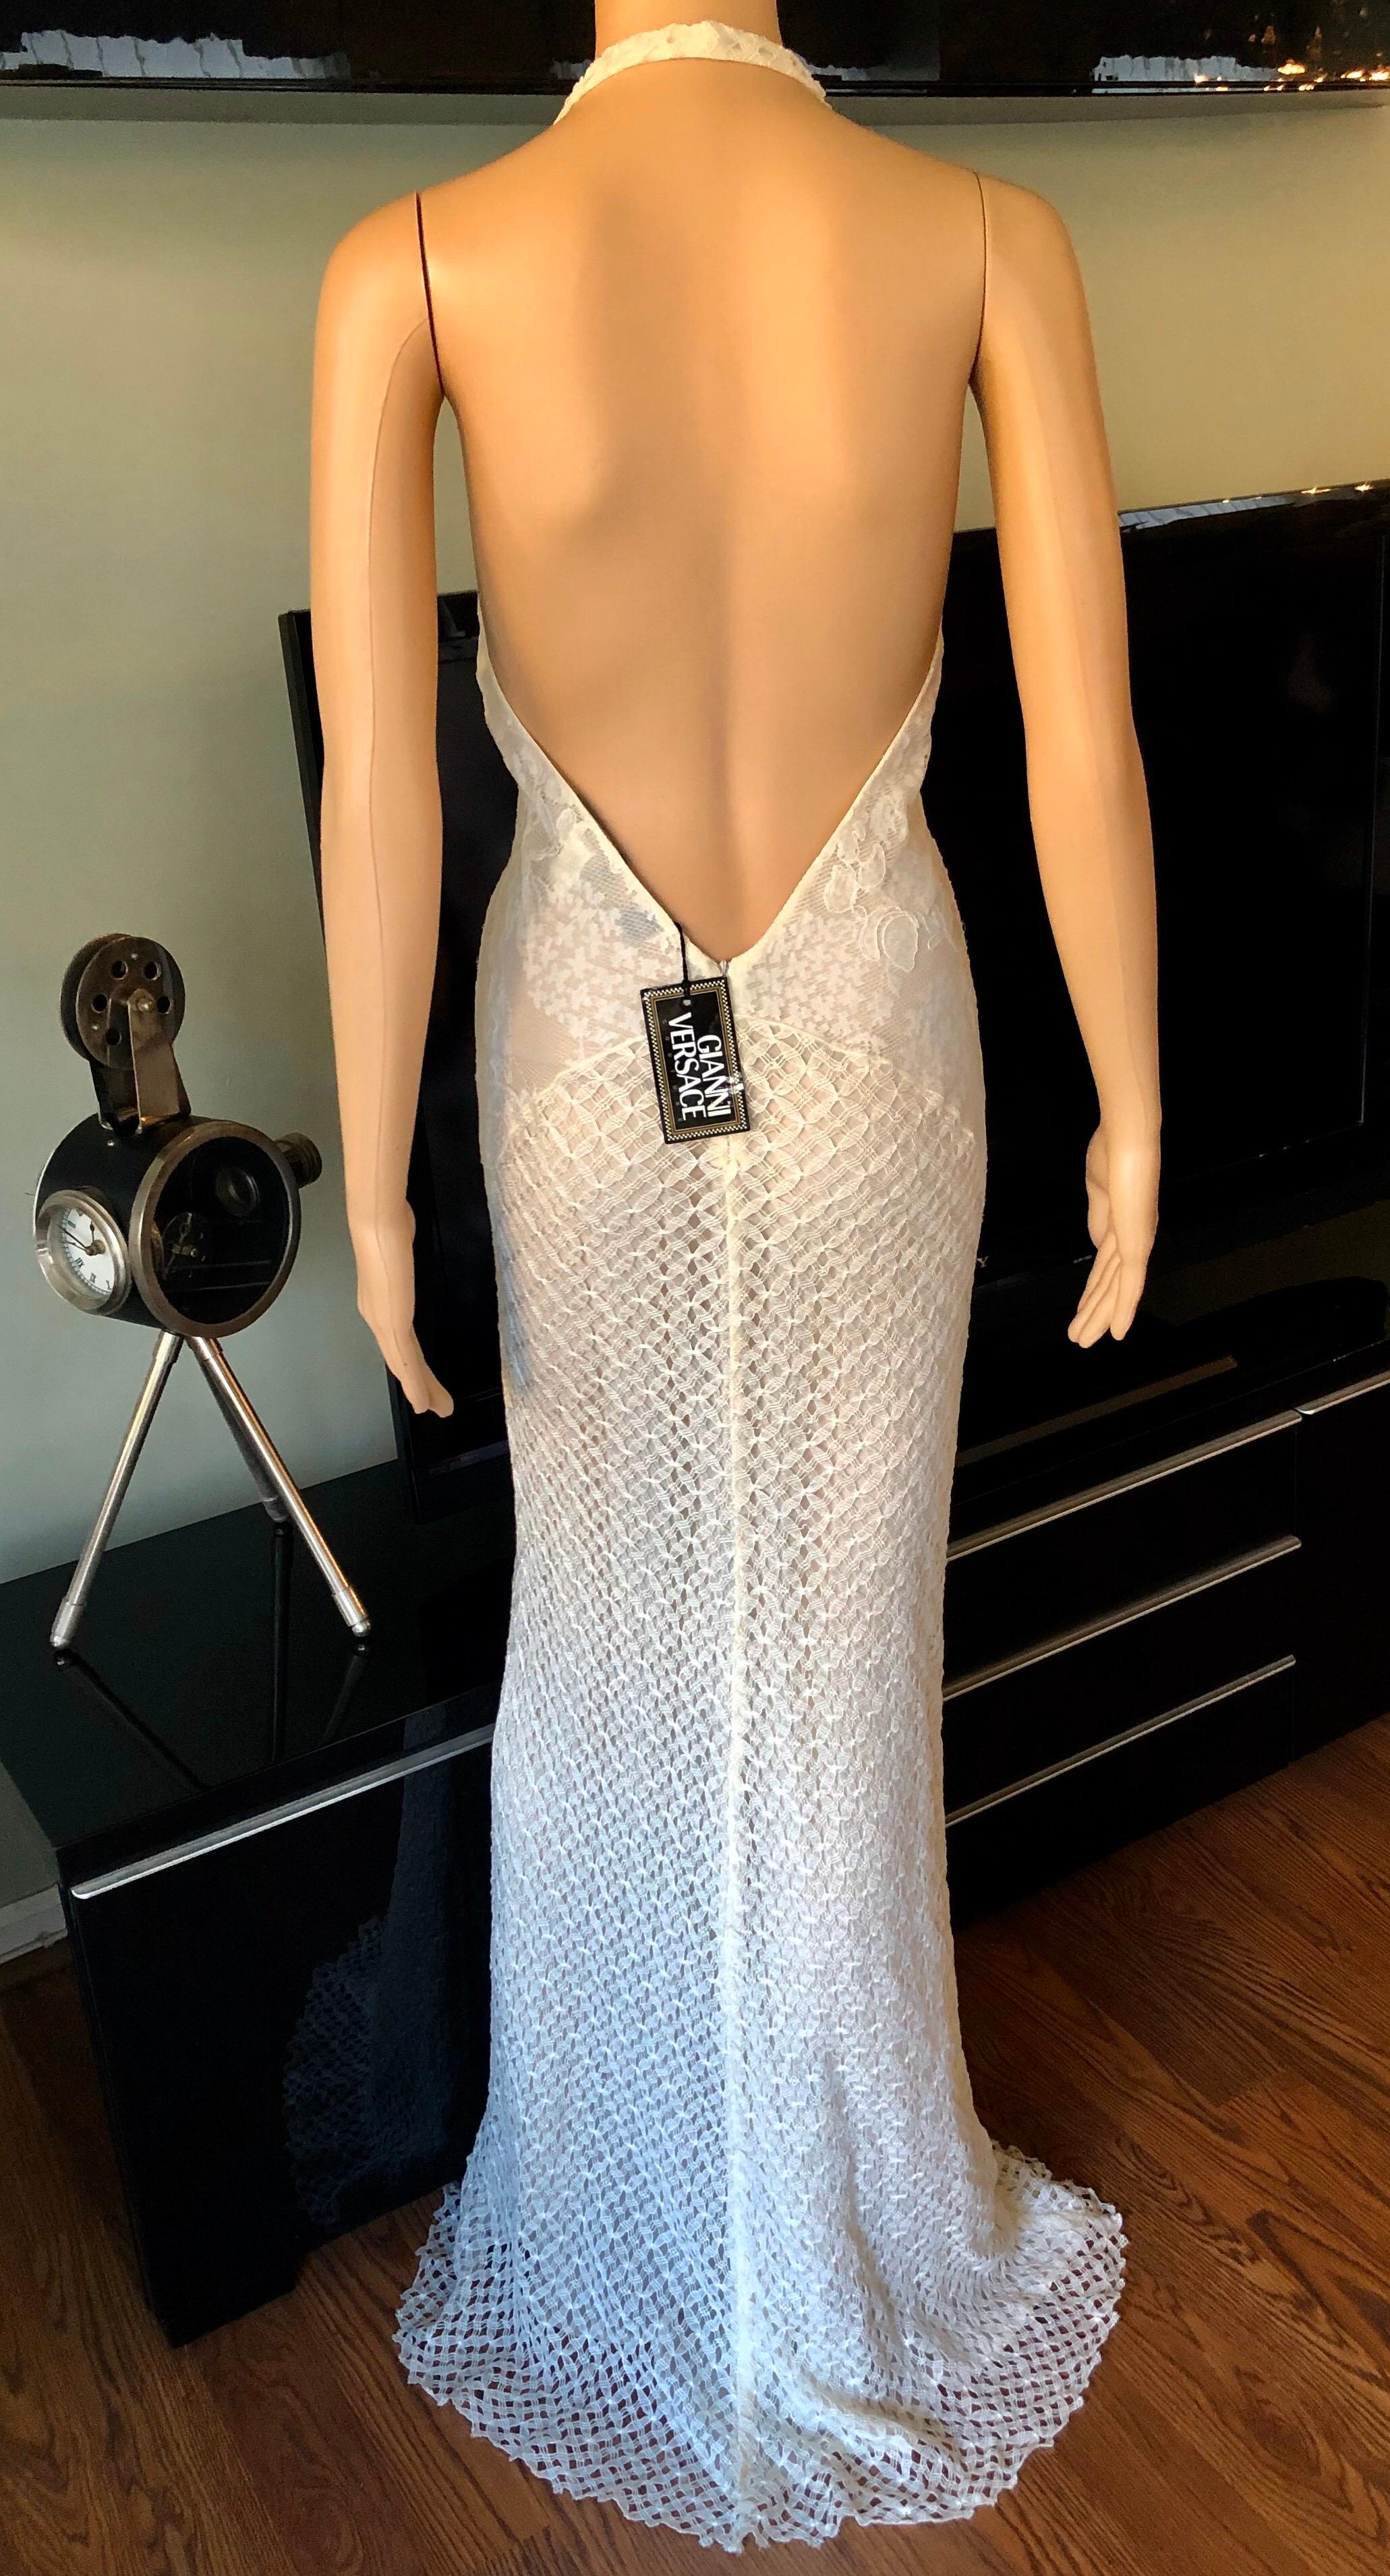 NWT Gianni Versace S/S 2002 Plunging Neckline Halter Backless Semi Sheer Corset Style Lace Up Ivory Dress Gown IT 44